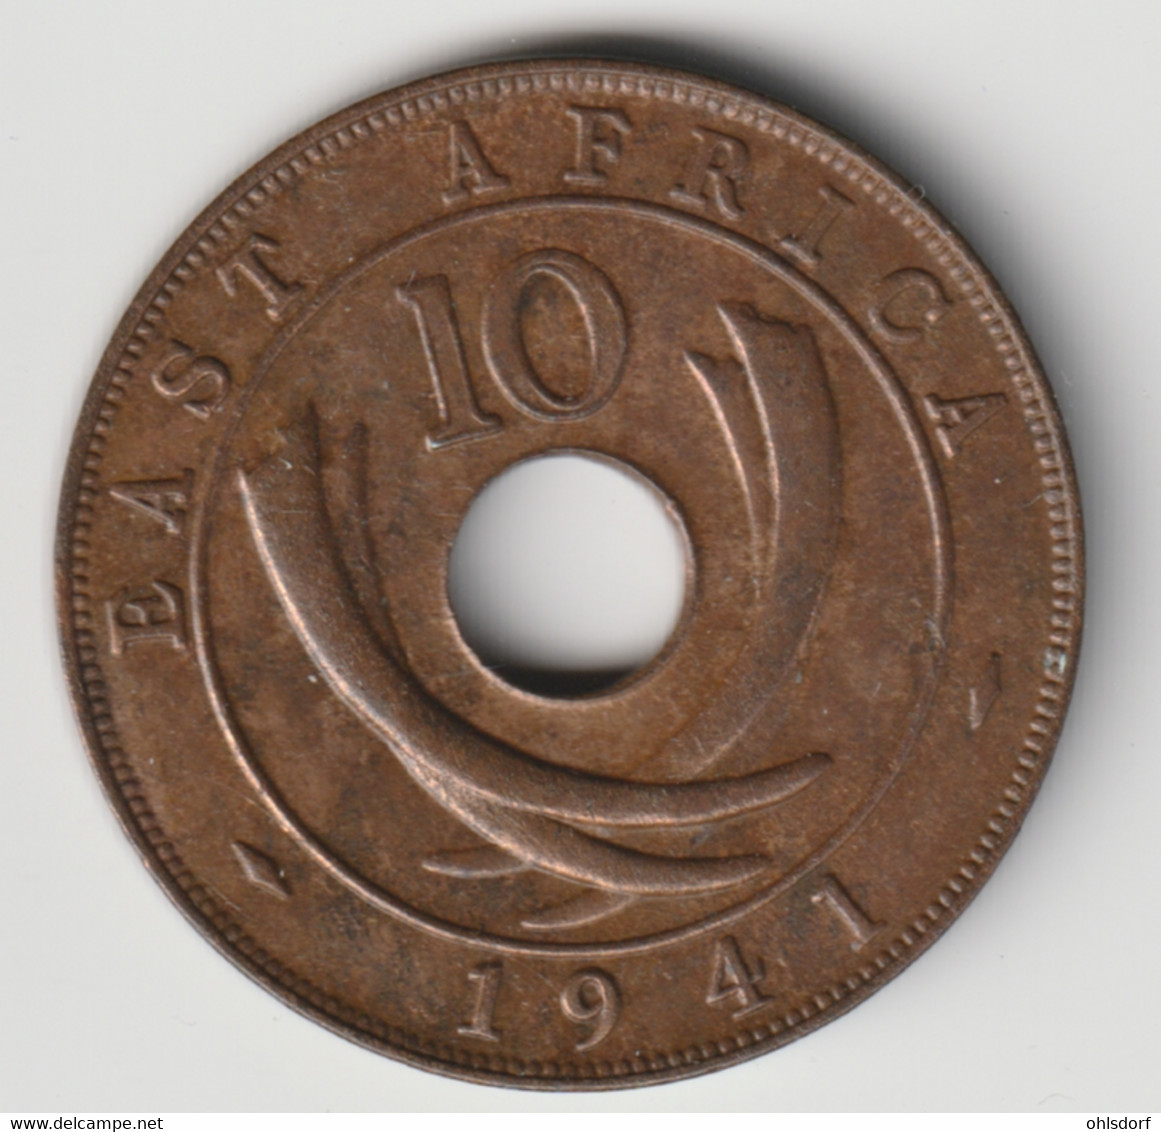 EAST AFRICA 1941: 10 Cents, KM 26 - Colonia Británica